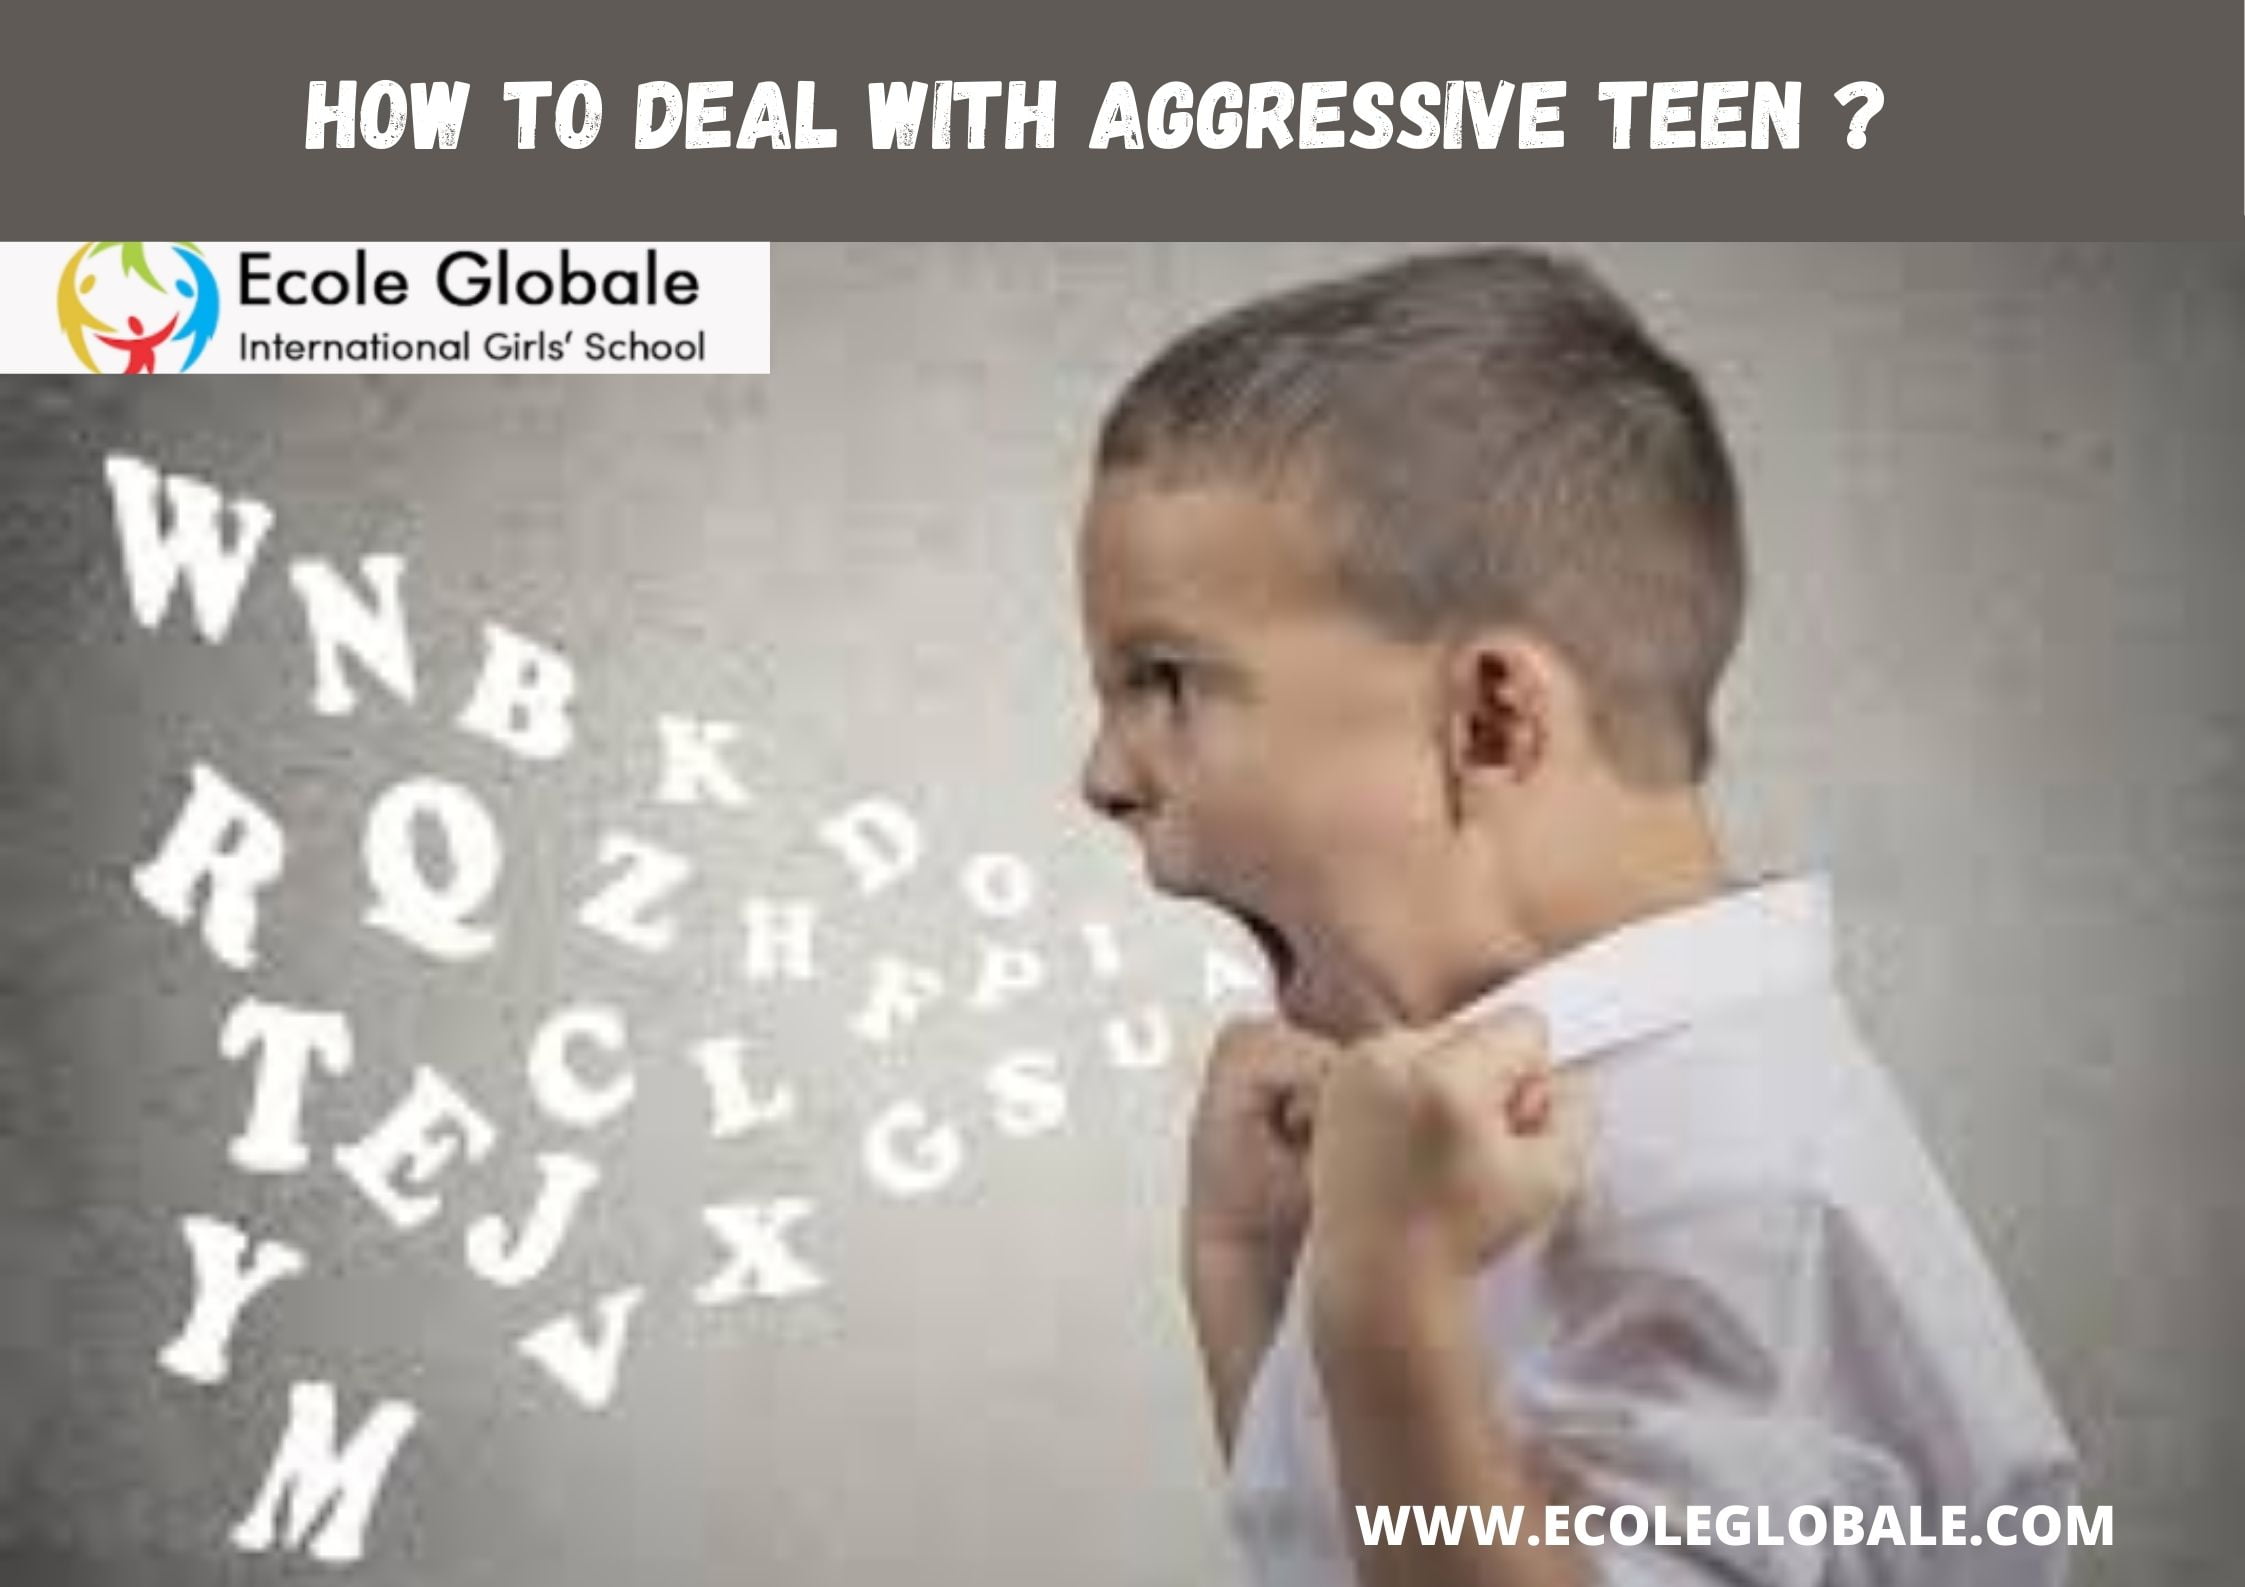 HOW TO DEAL WITH YOUR AGGRESSIVE TEEN